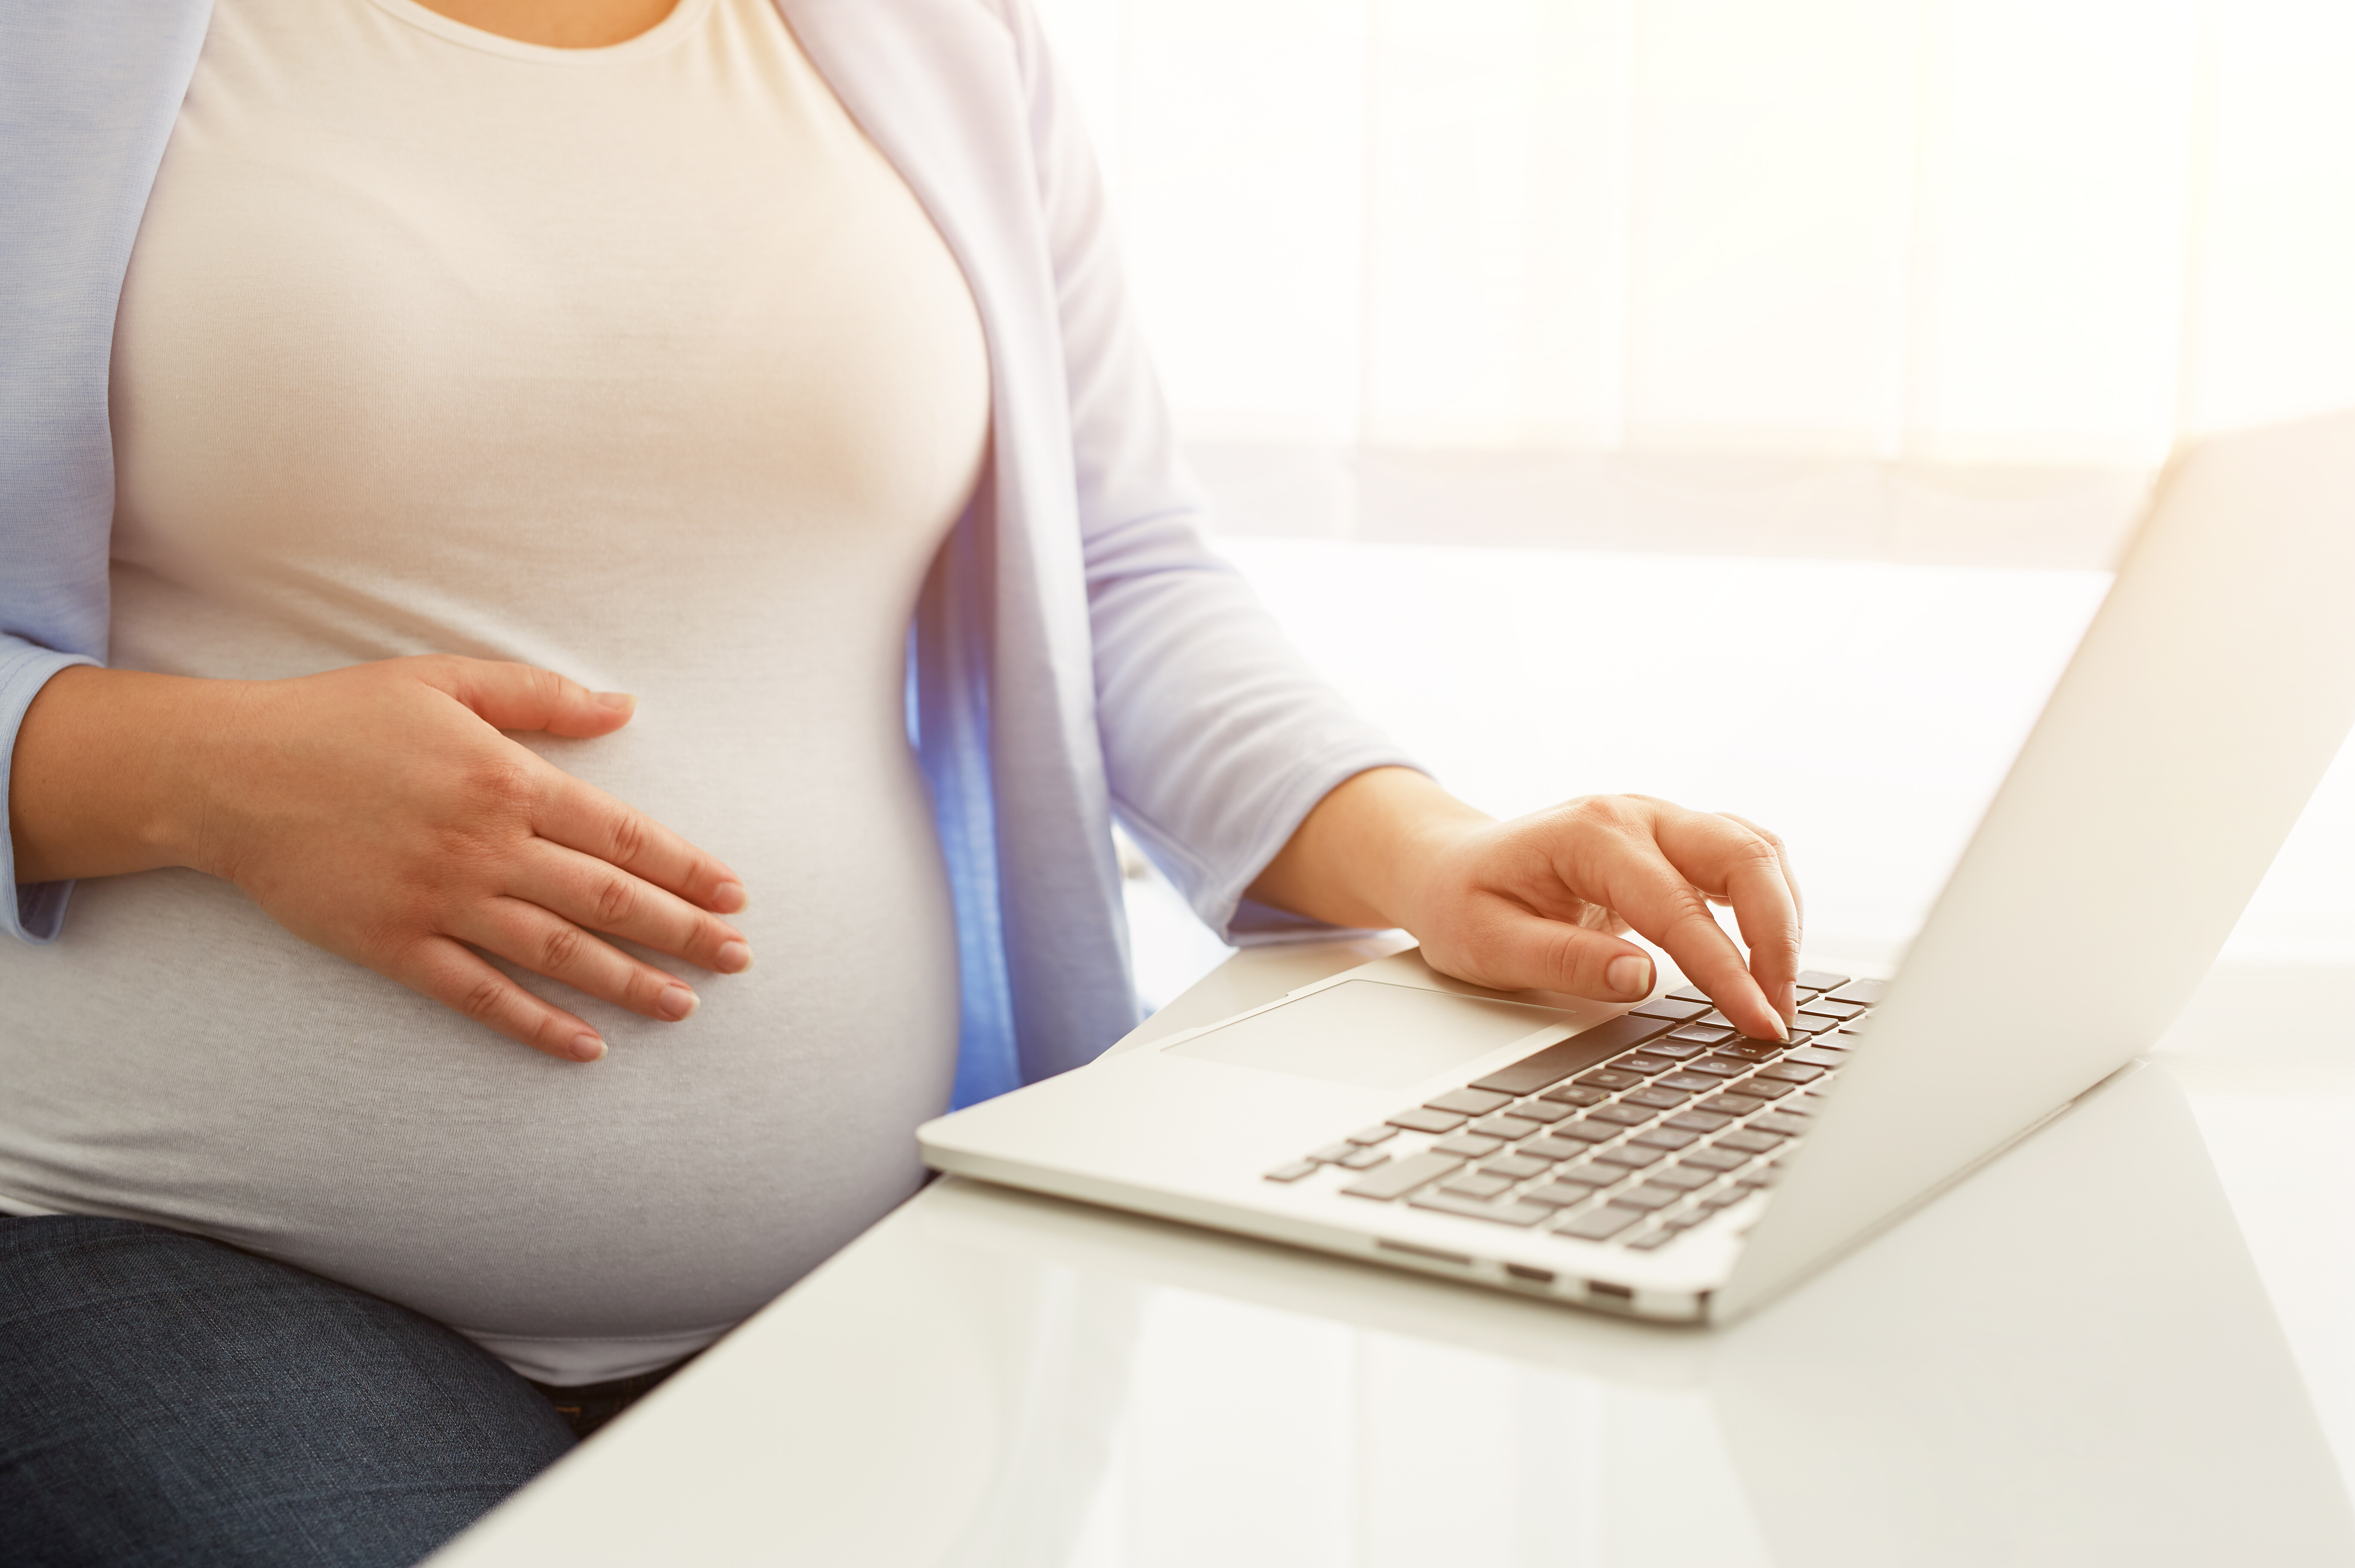 pregnant woman googling how do you find a surrogate mother on laptop